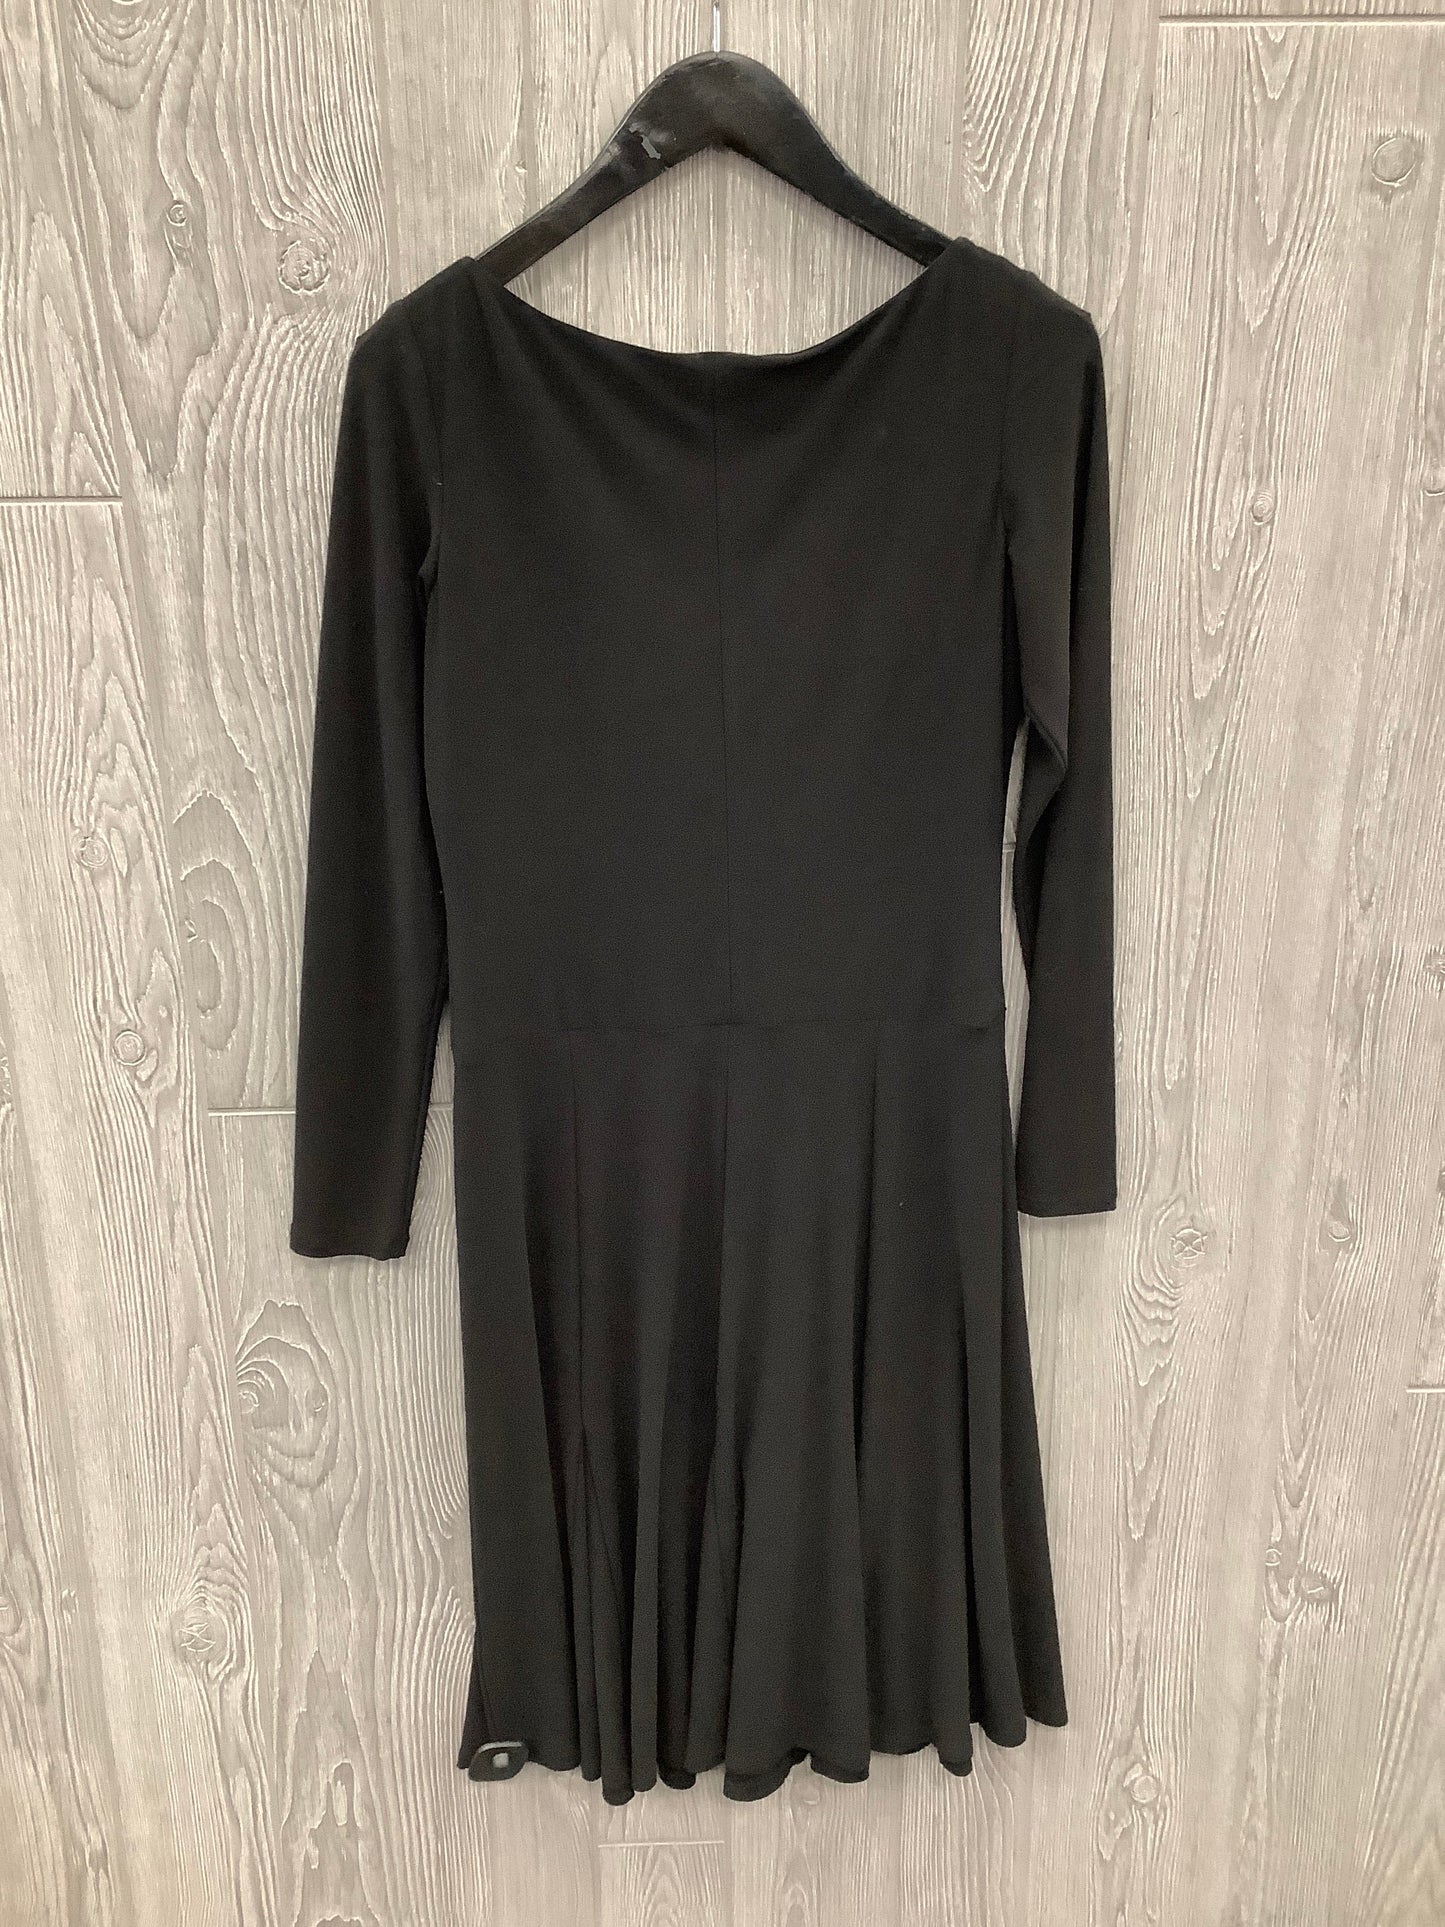 Dress Casual Midi By Chaps  Size: S